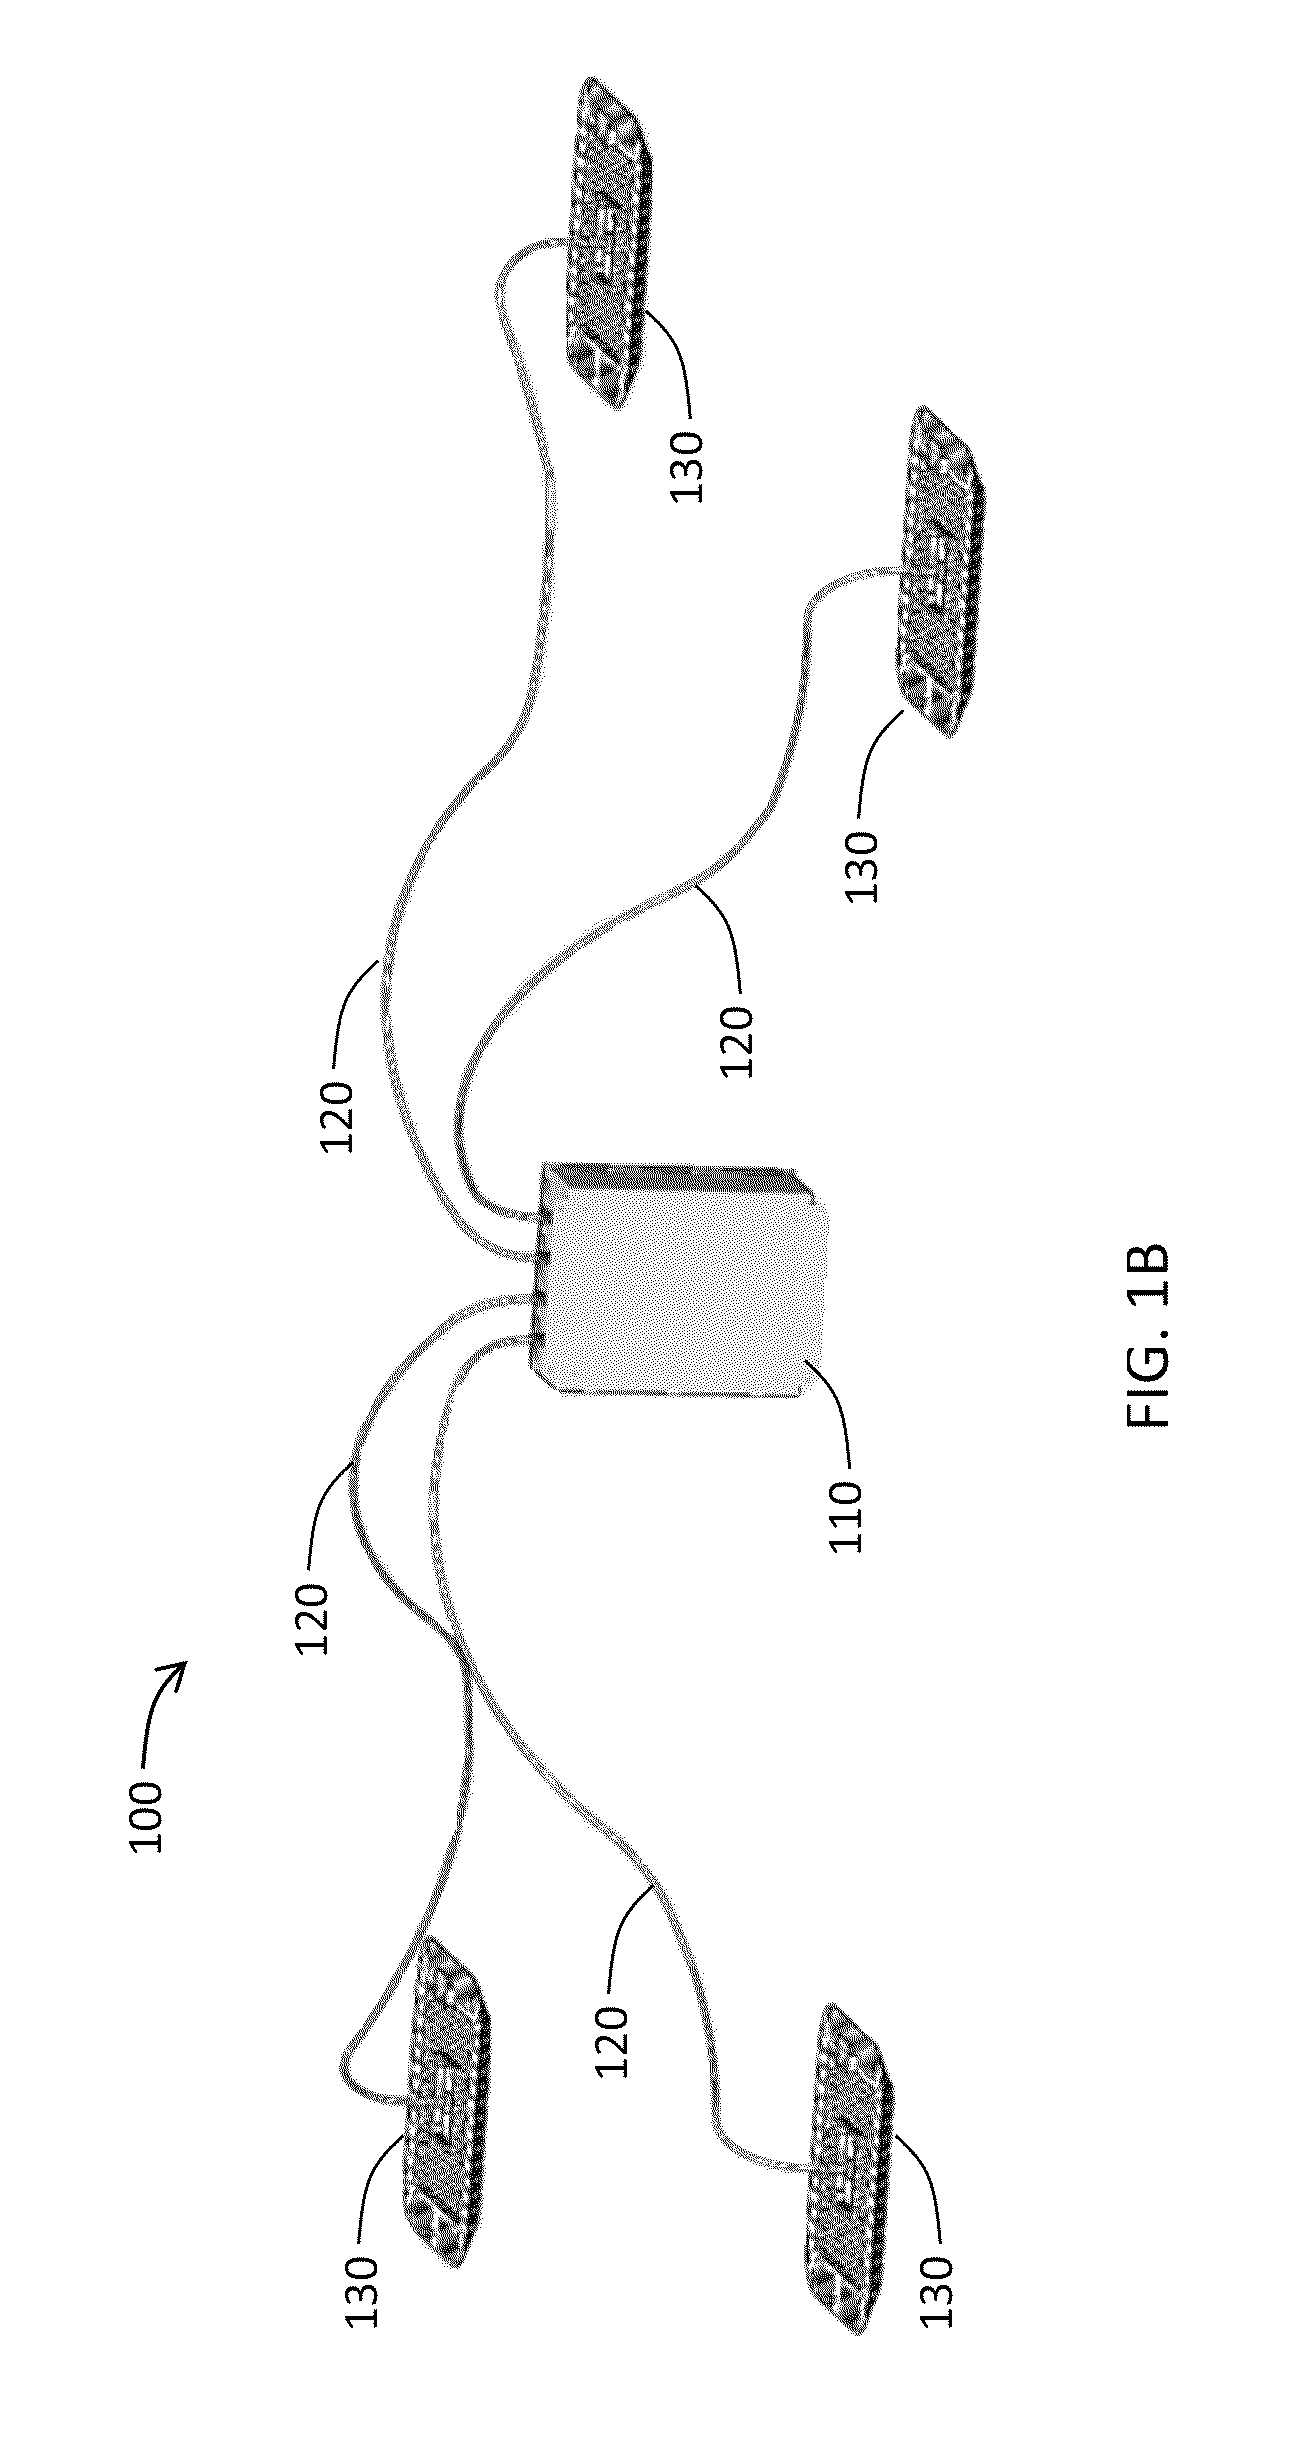 Canopy light system and associated methods